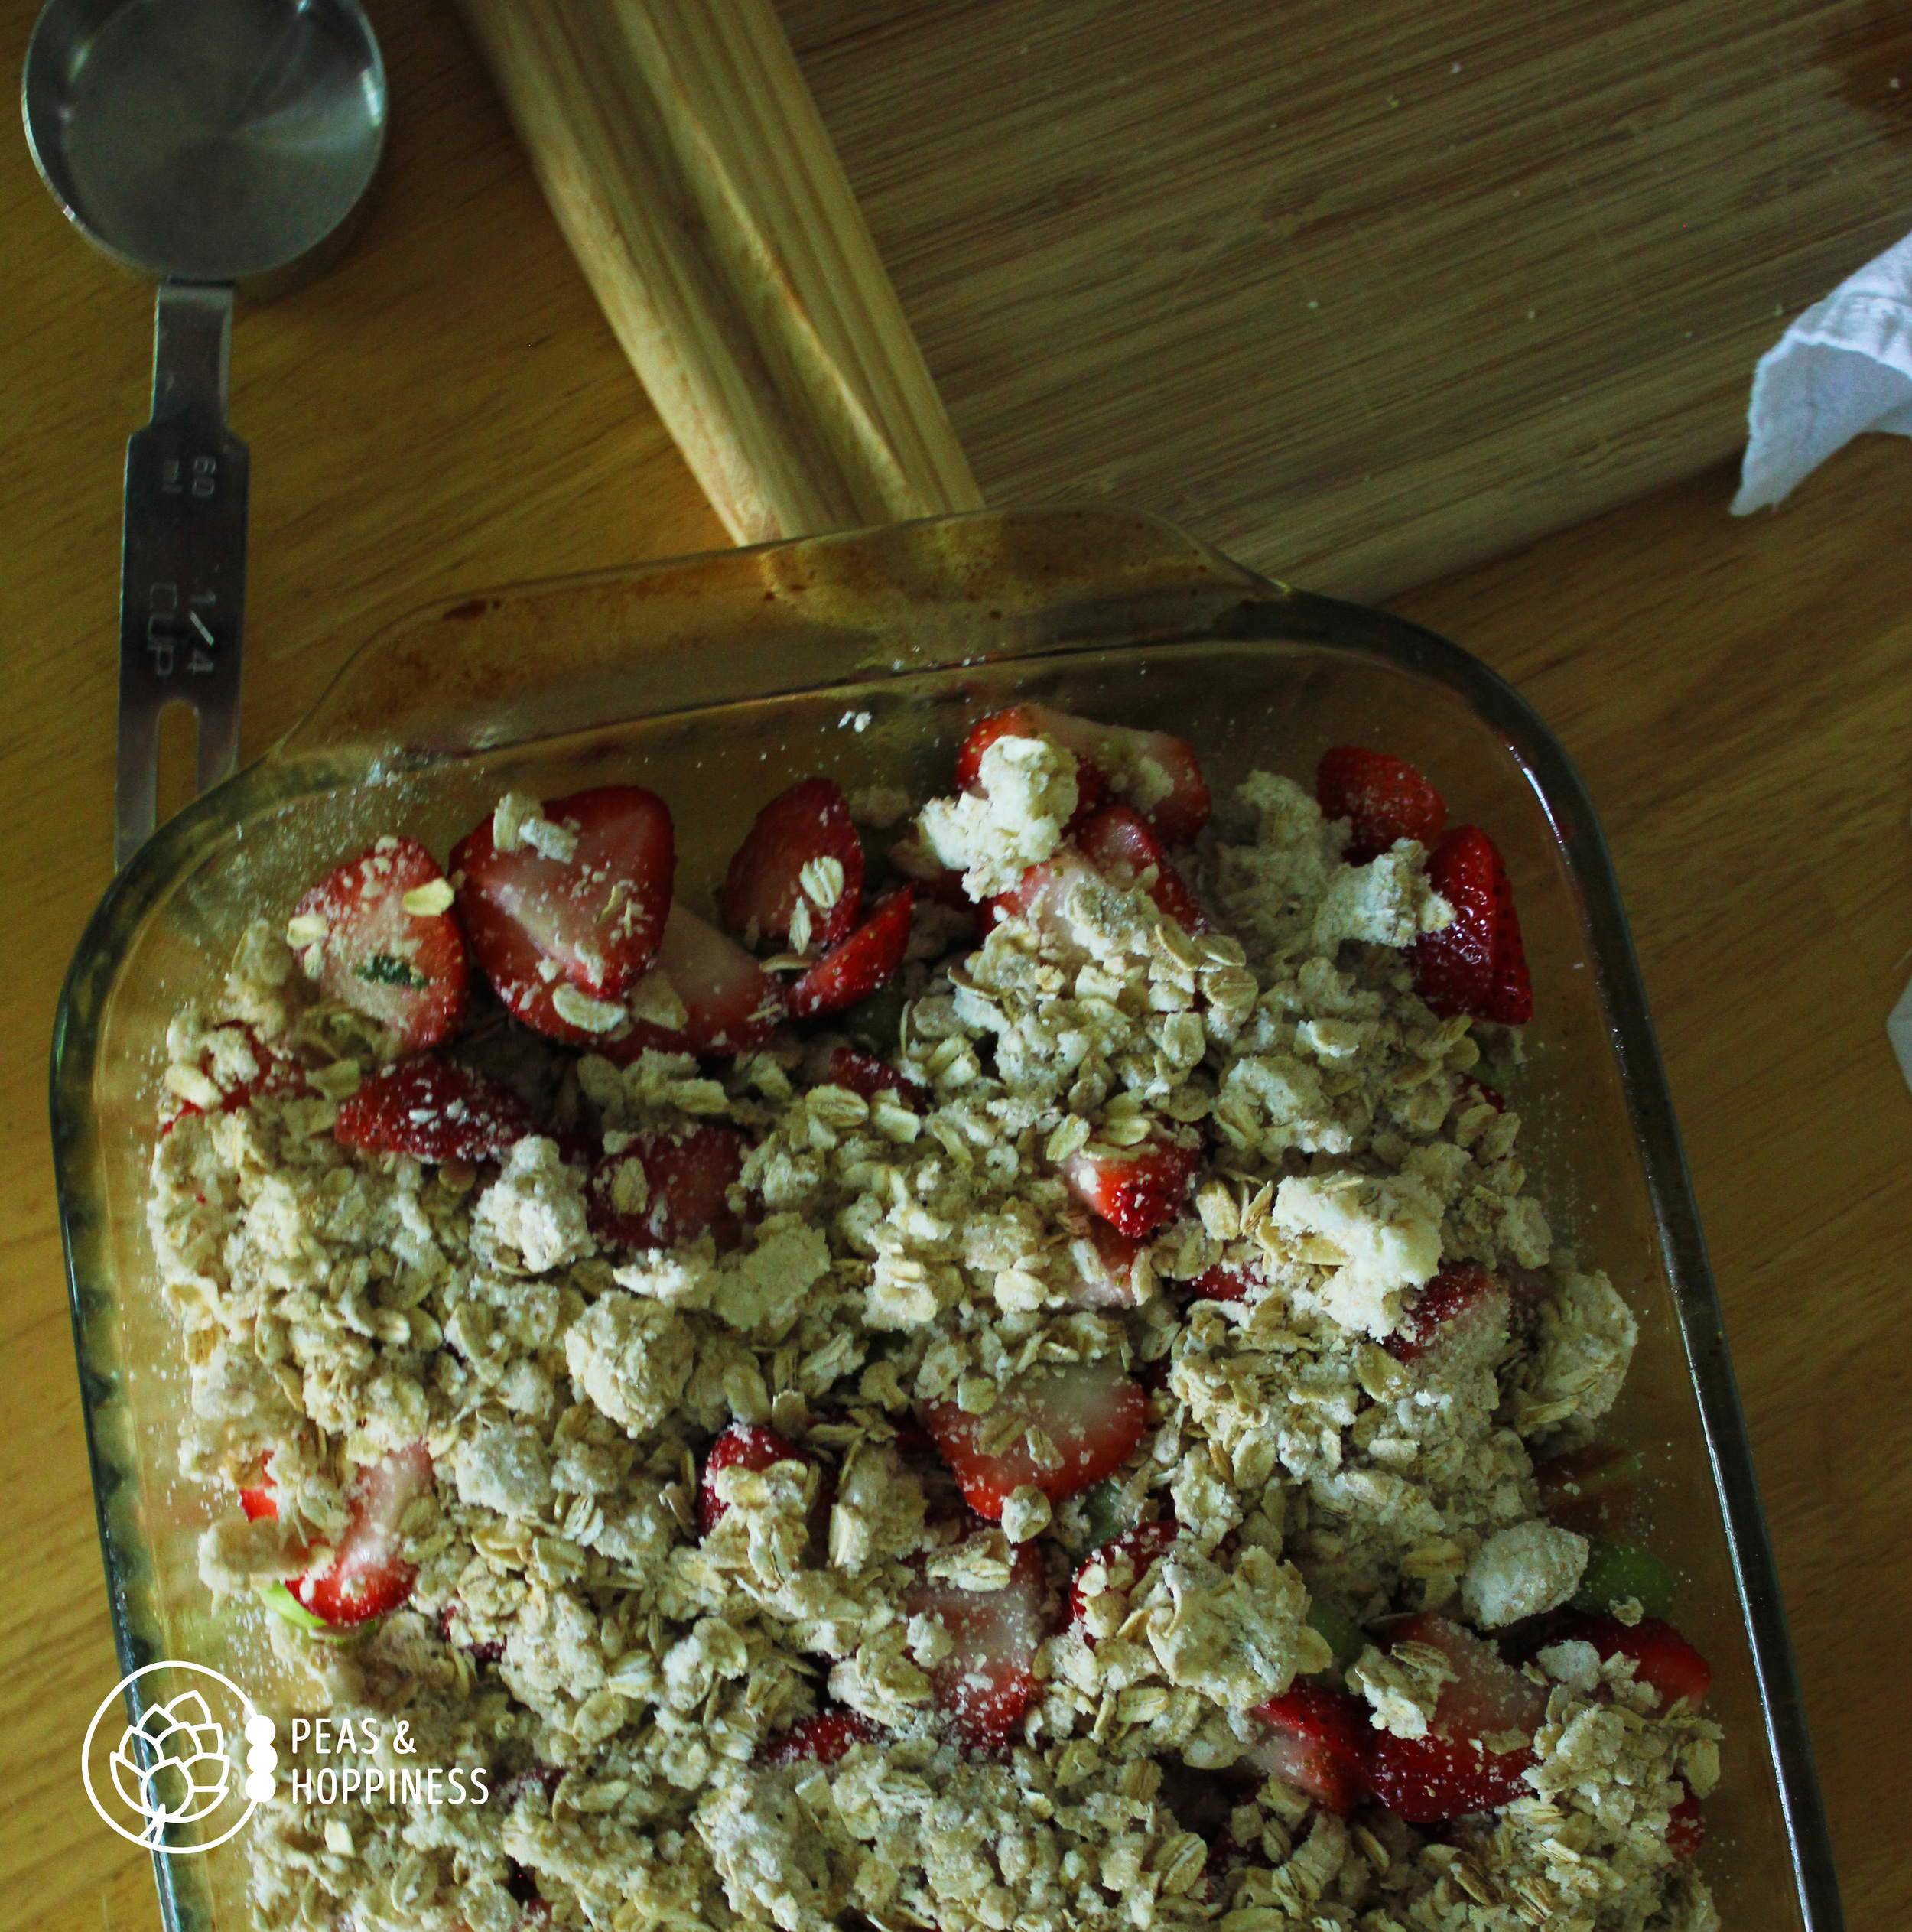 Strawberry Rhubarb Crisp from Peas and Hoppiness - www.peasandhoppiness.com